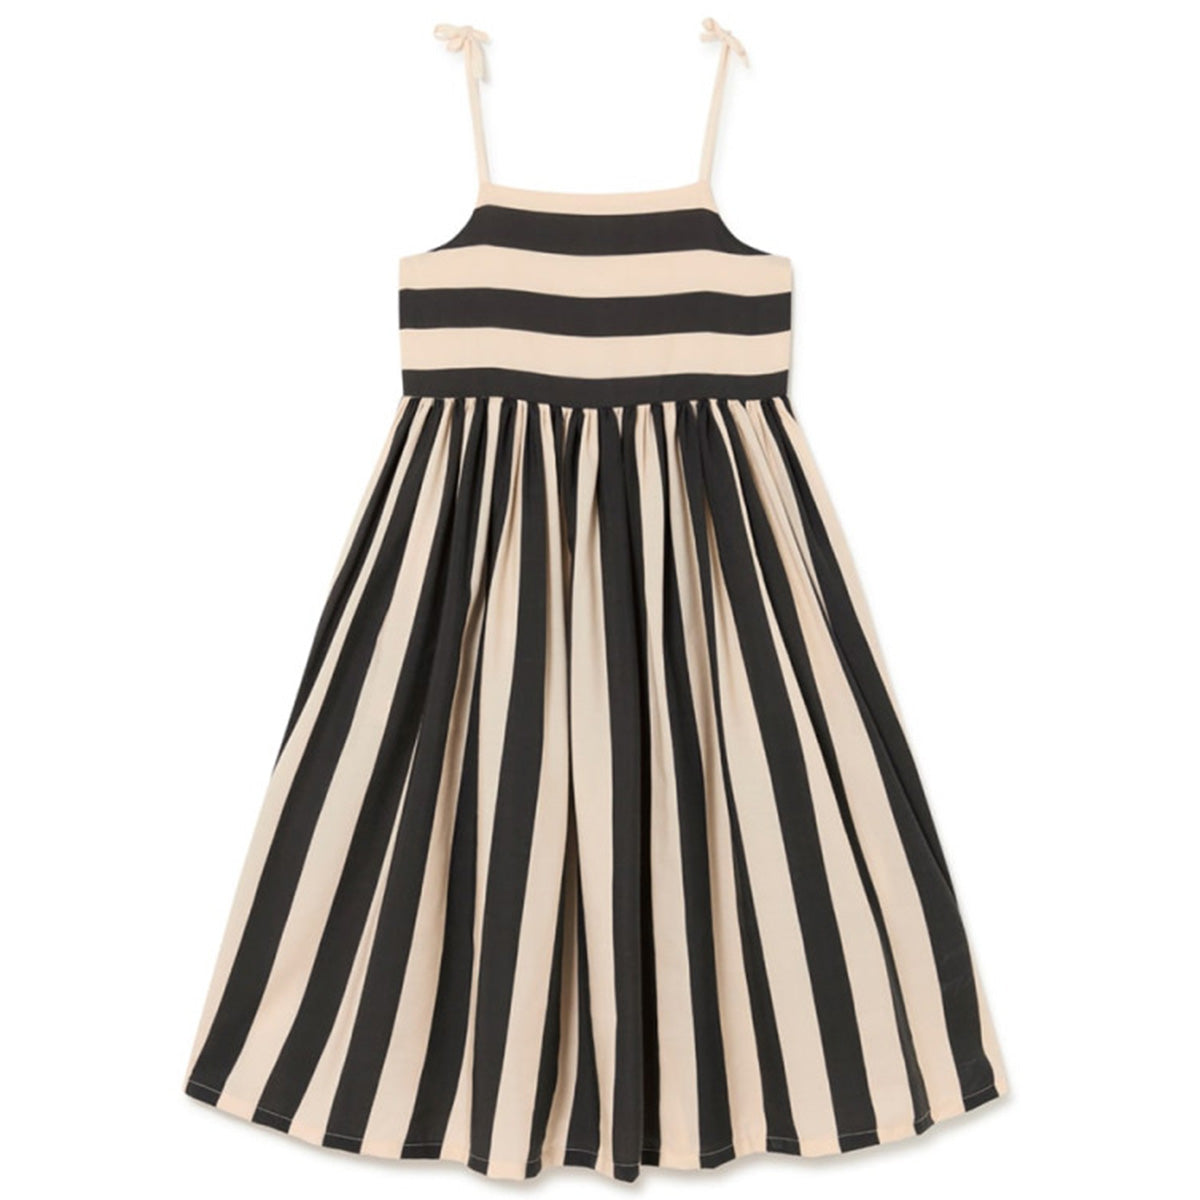 The Iconic Lines Sundress from Little Creative Factory. Strappy top ankle length dress in amorous lyocell fabric